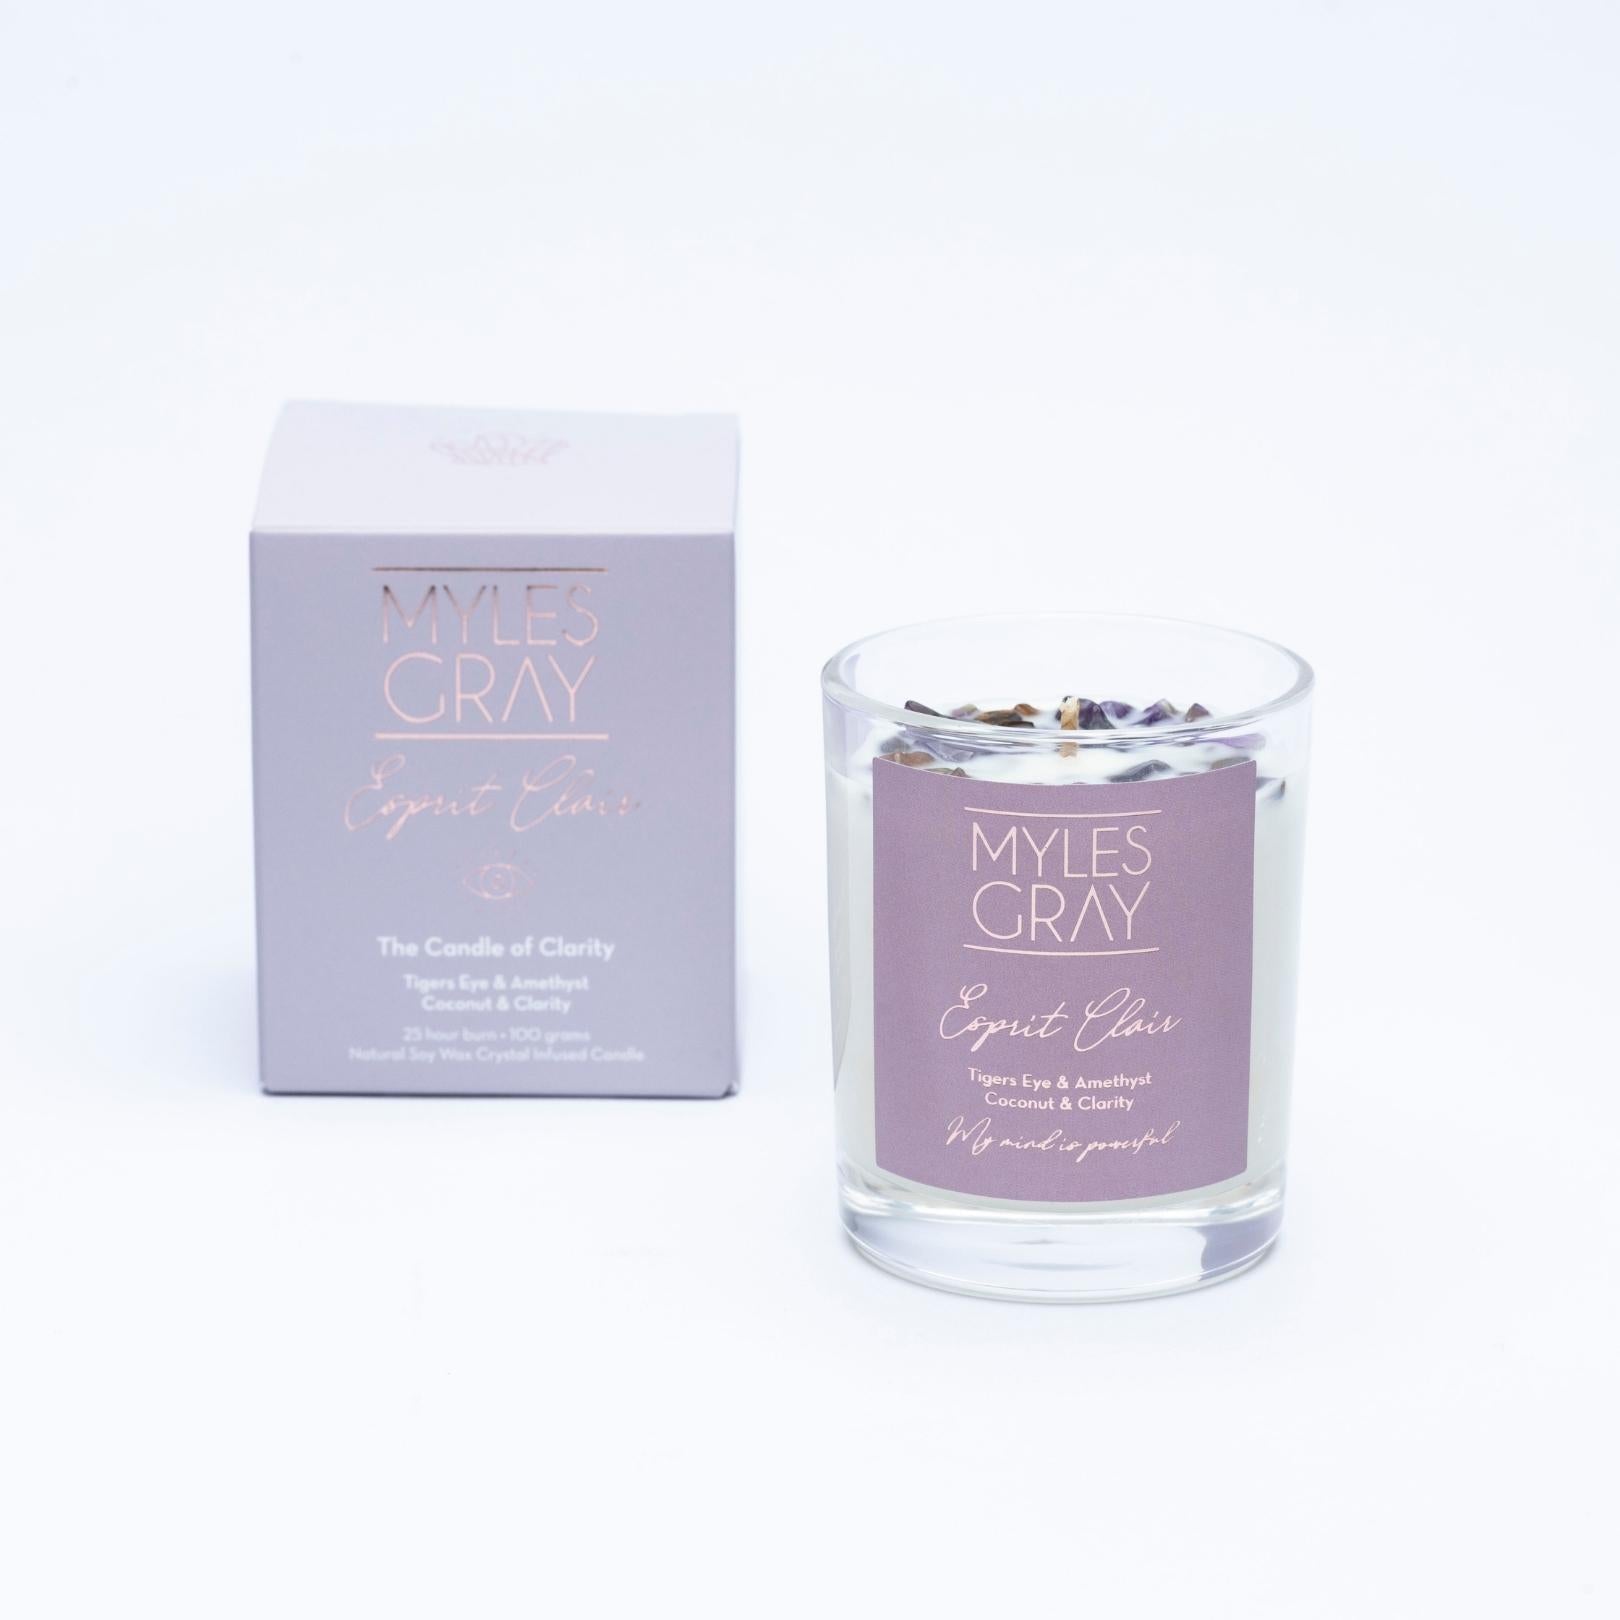 Esprit Clair | The Mini Candle of Clarity - Myles Gray